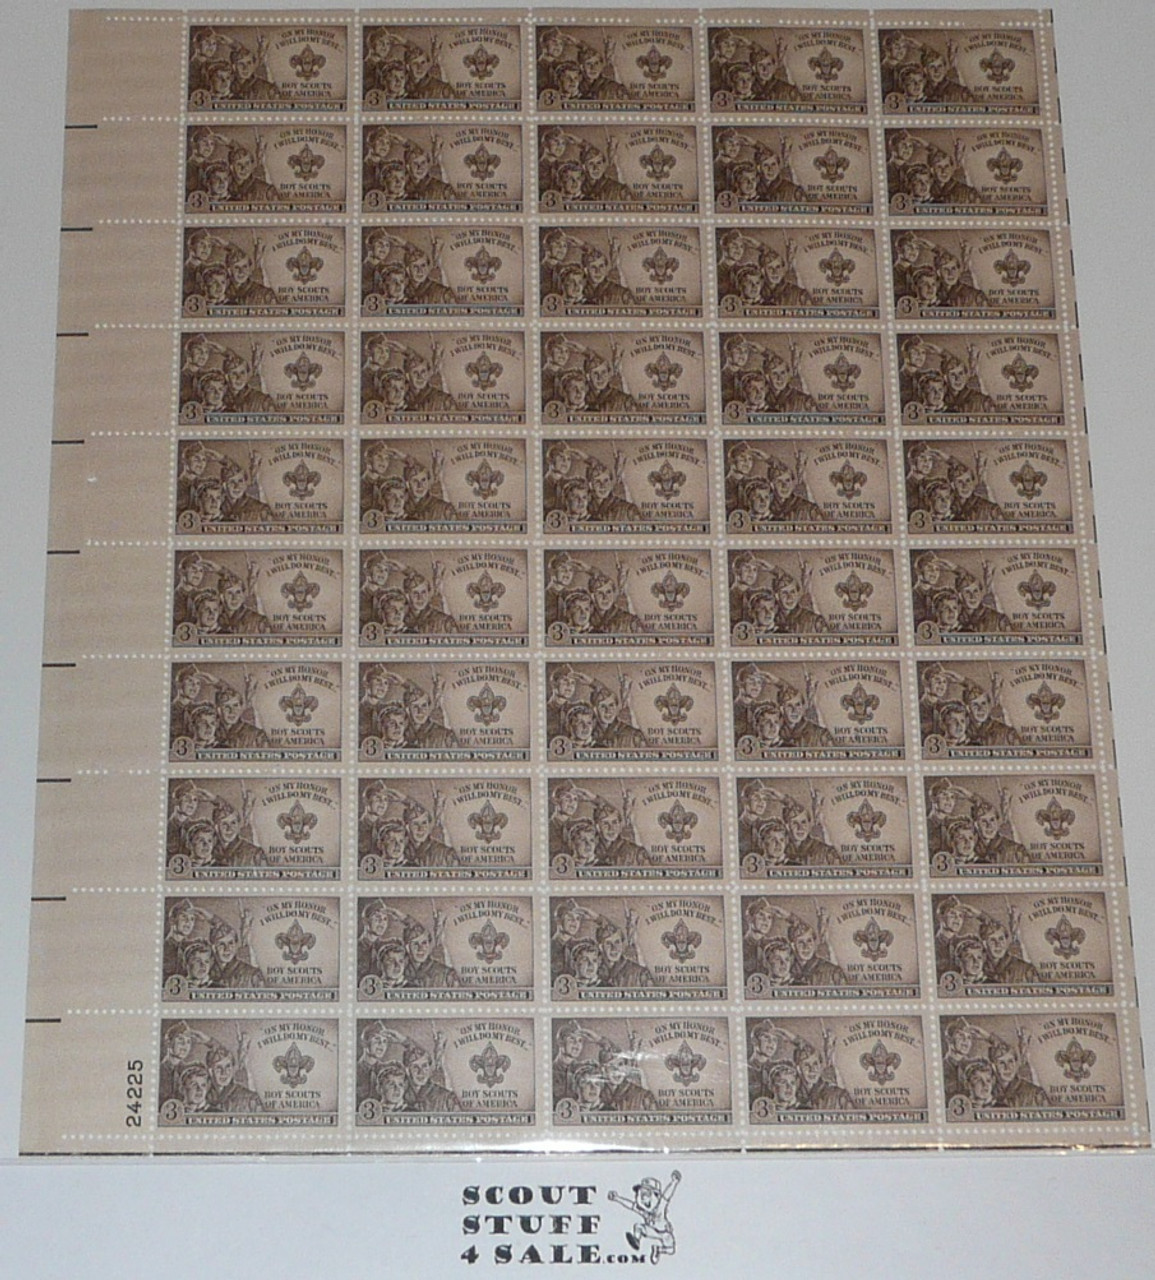 Full Sheet of the 3 cent Boy Scouts of America Stamp